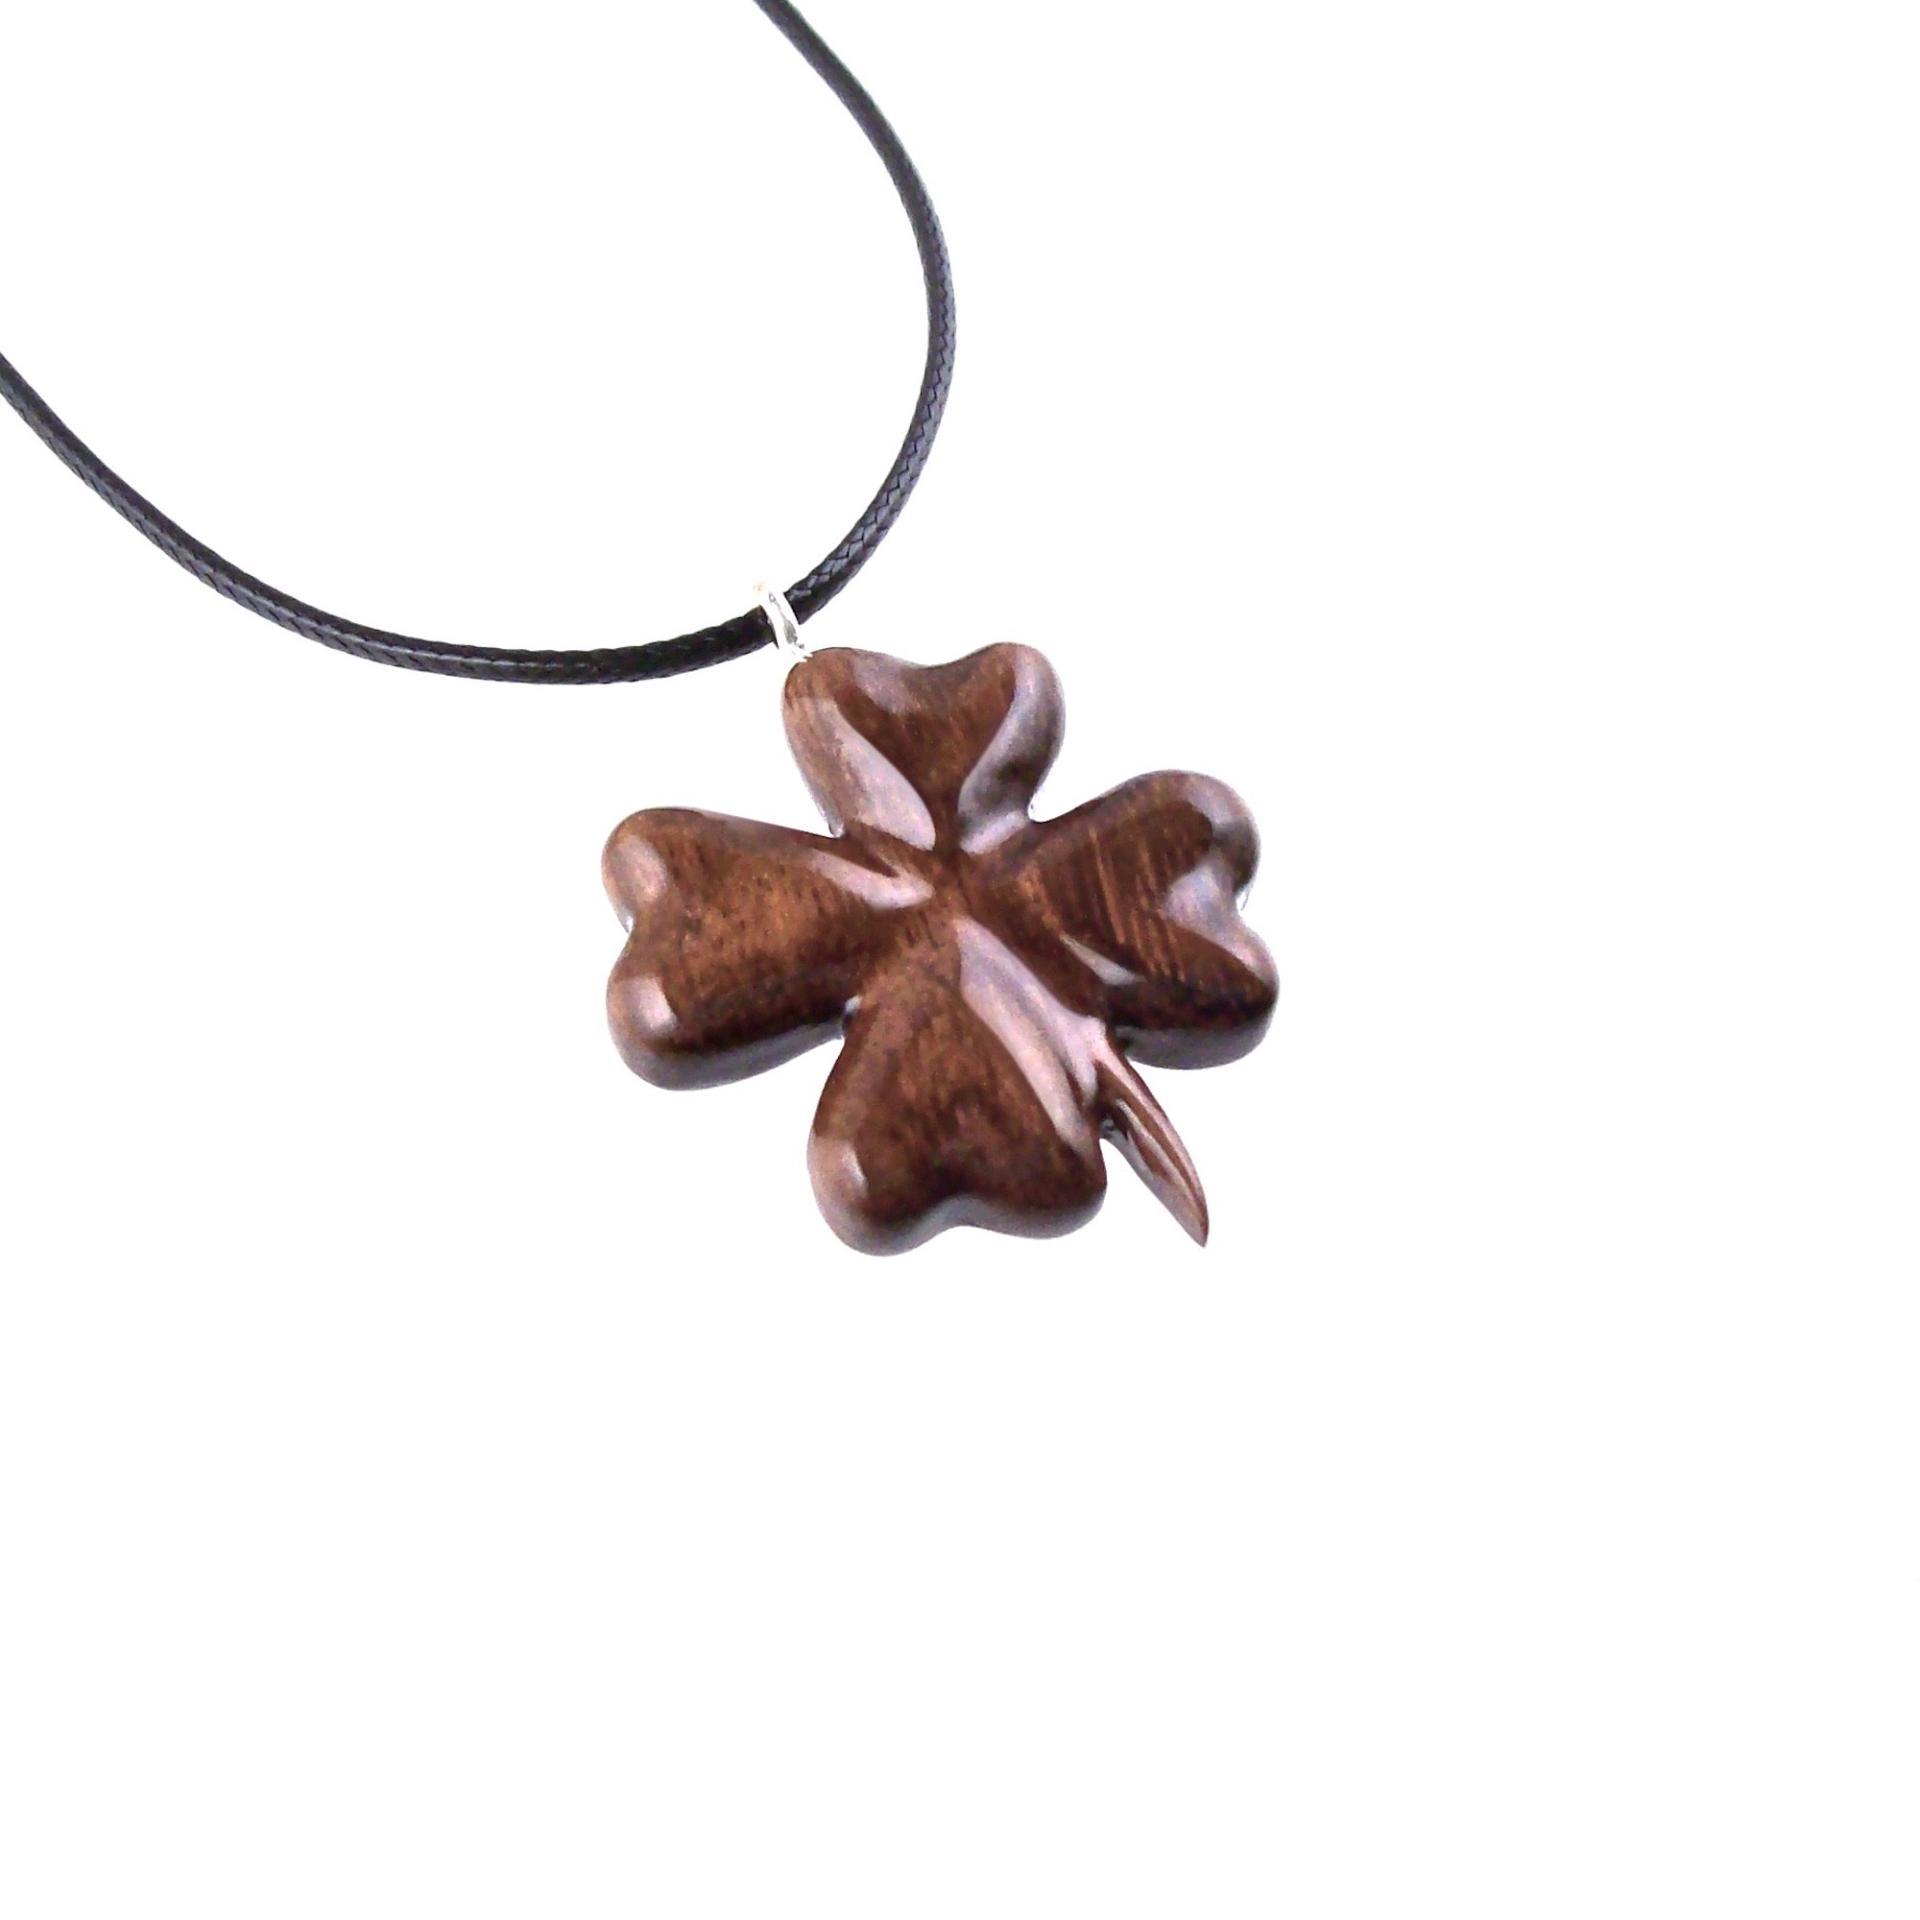 Hand Carved Four Leaf Clover Necklace, Wooden Shamrock Pendant, Lucky Charm Amulet, Good Luck Wood Jewelry Gift for Her